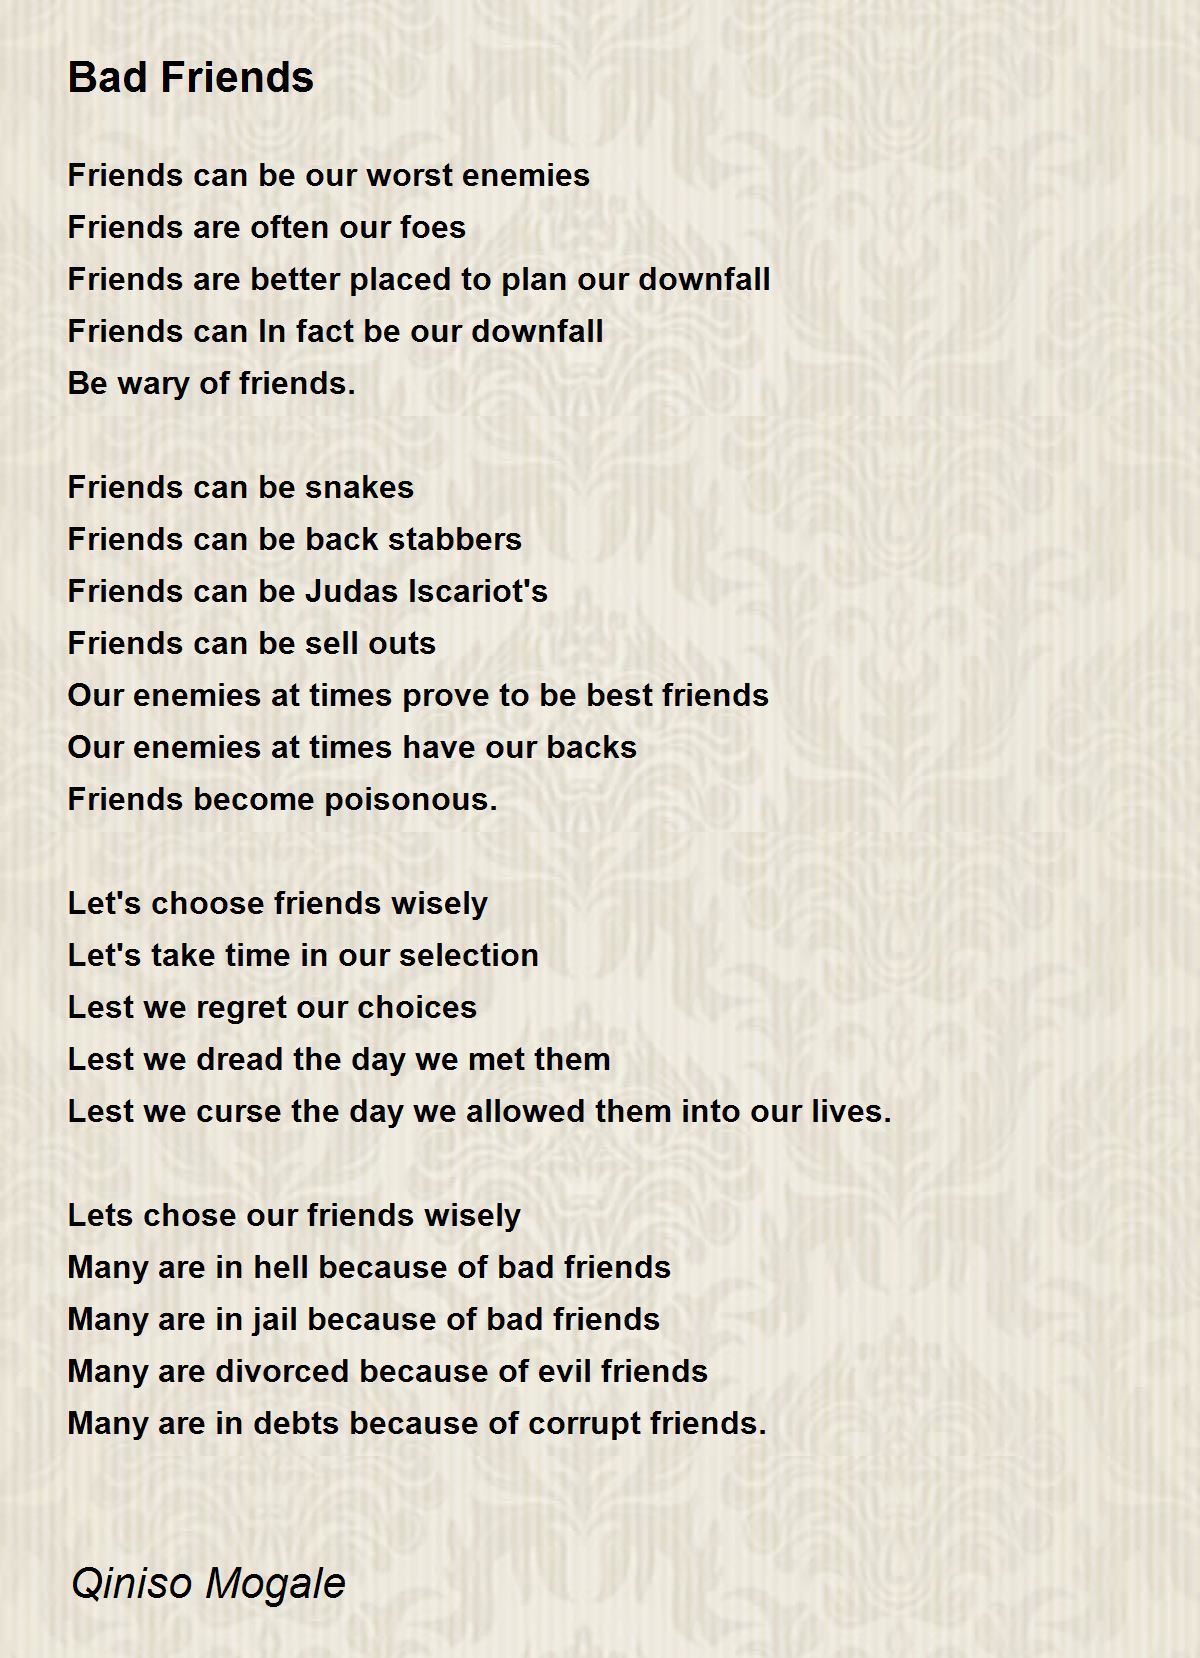 rhyming poems about friendship